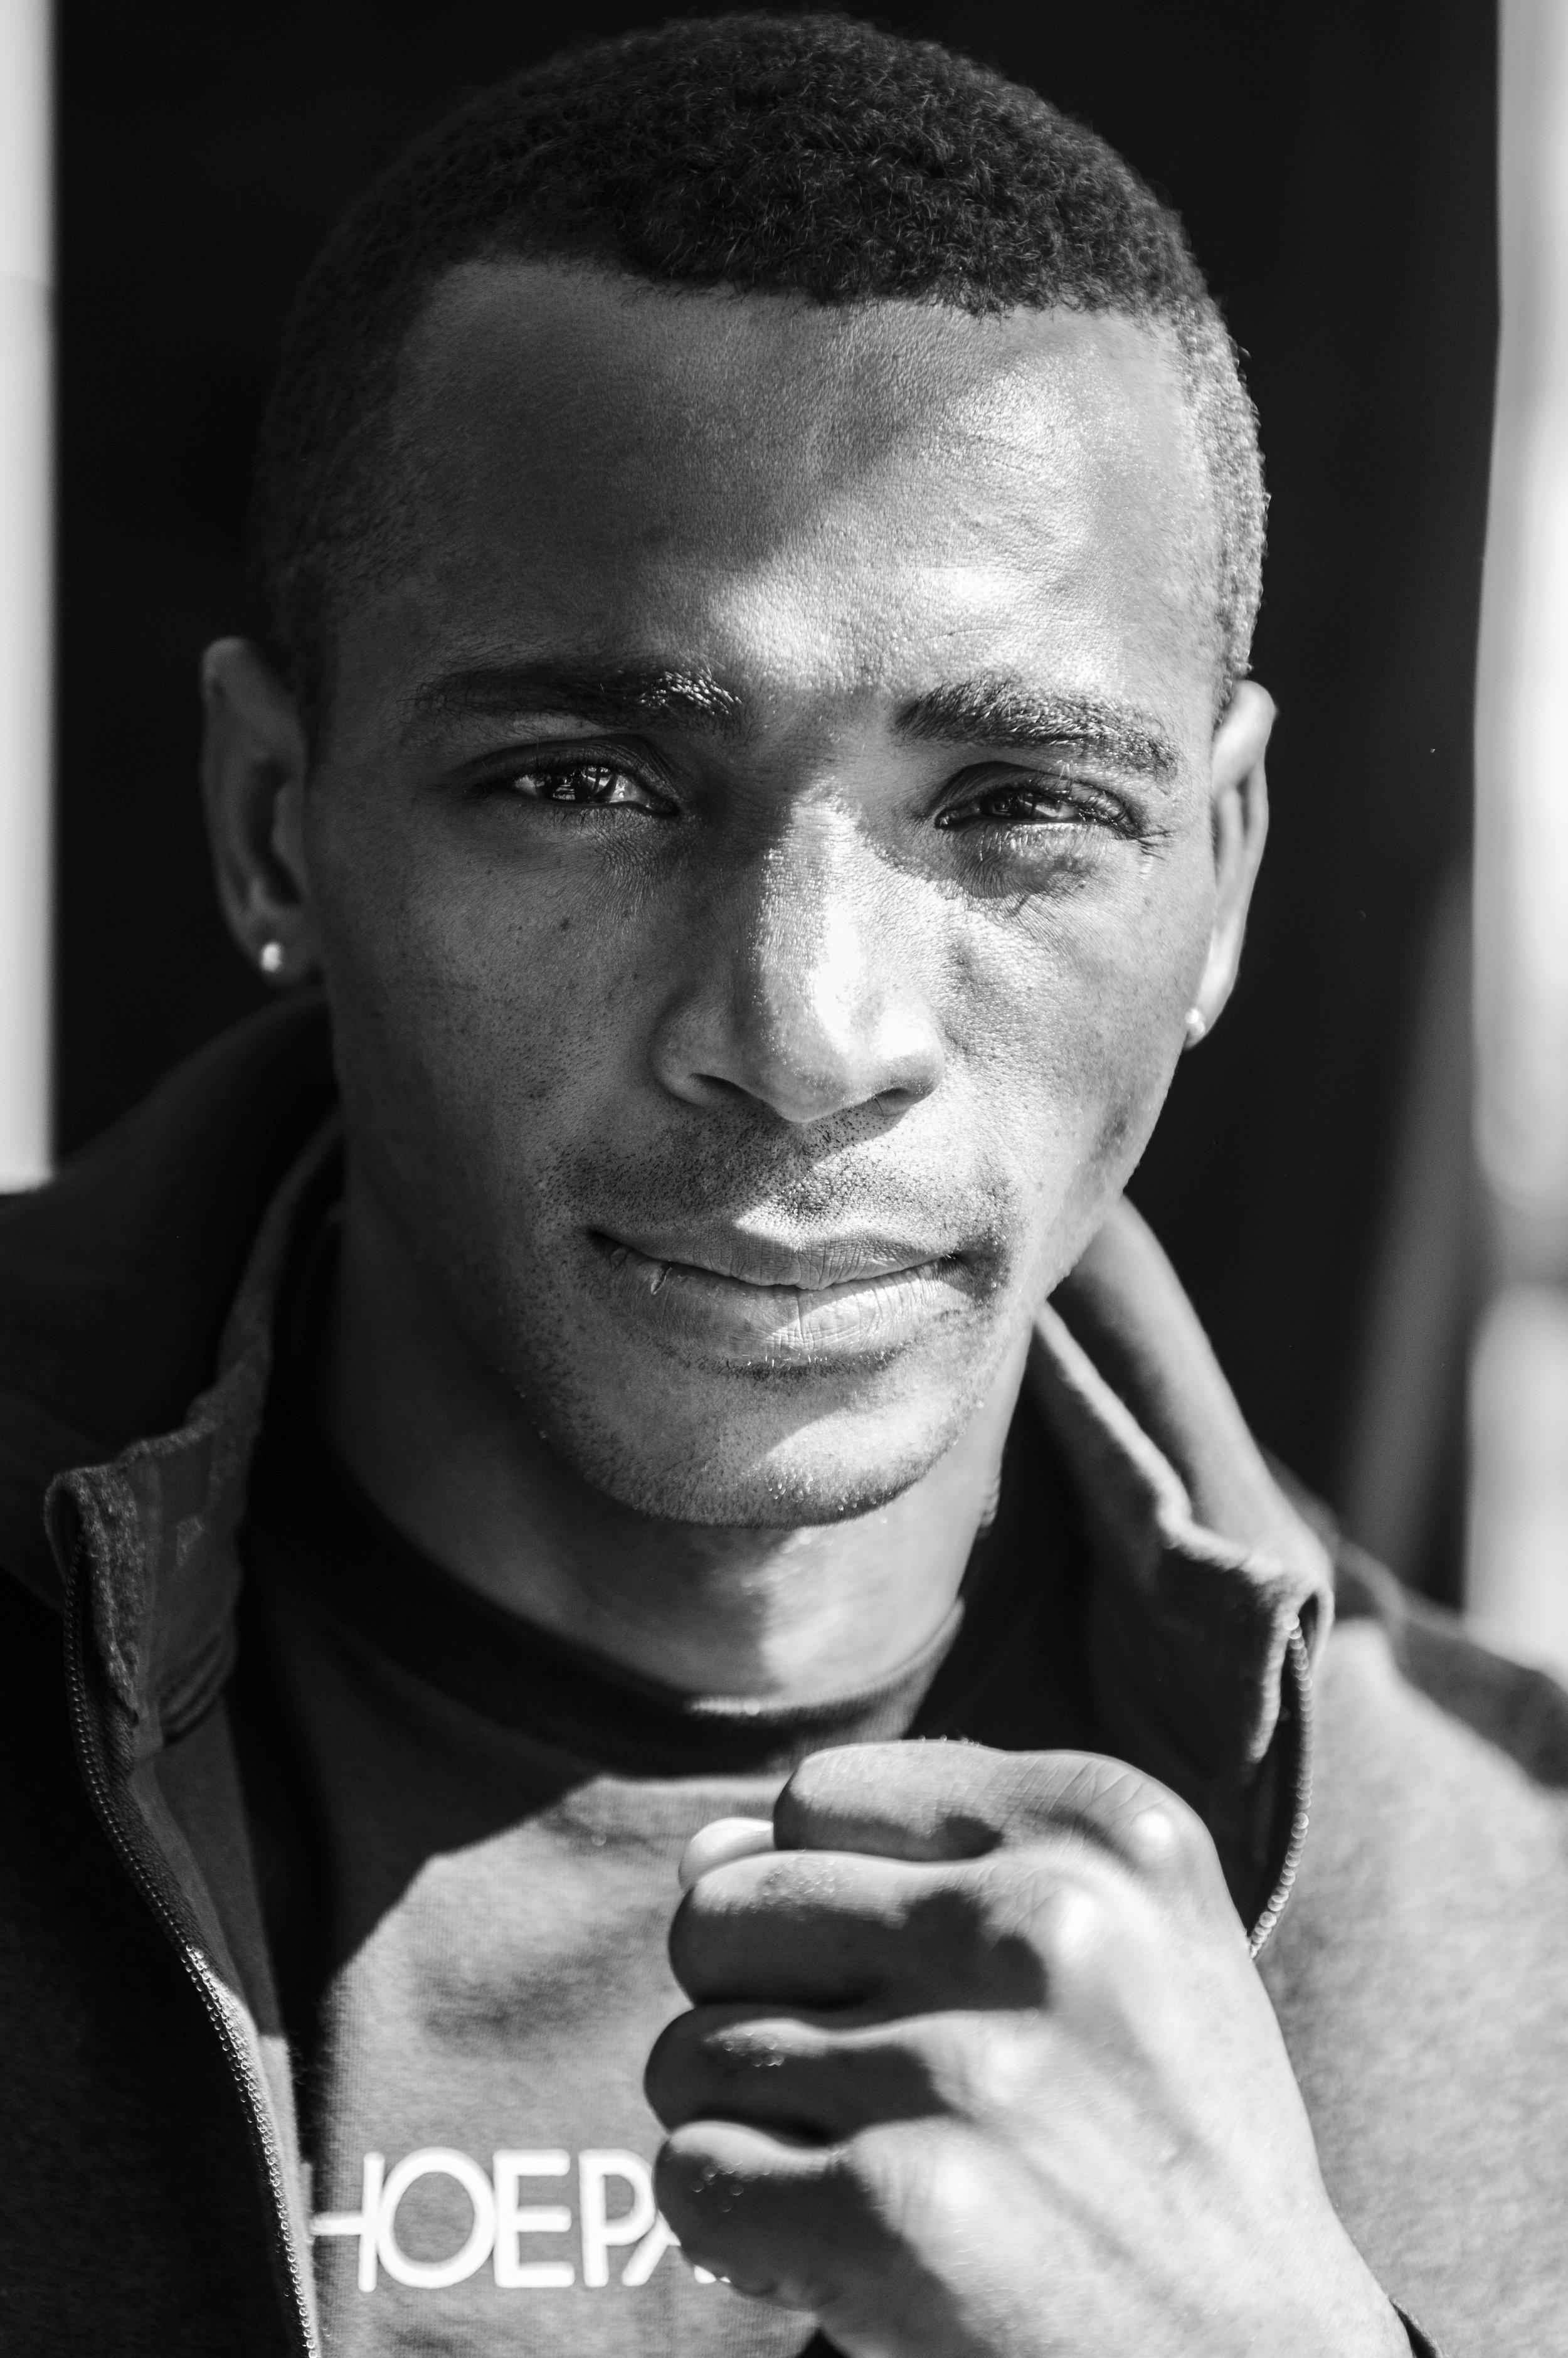  Cuban boxer Erislandy Lara poses for a portrait after his press conference today. Lara defended both his WBA and IBO Light Middleweight titles against Yuri Foreman. 